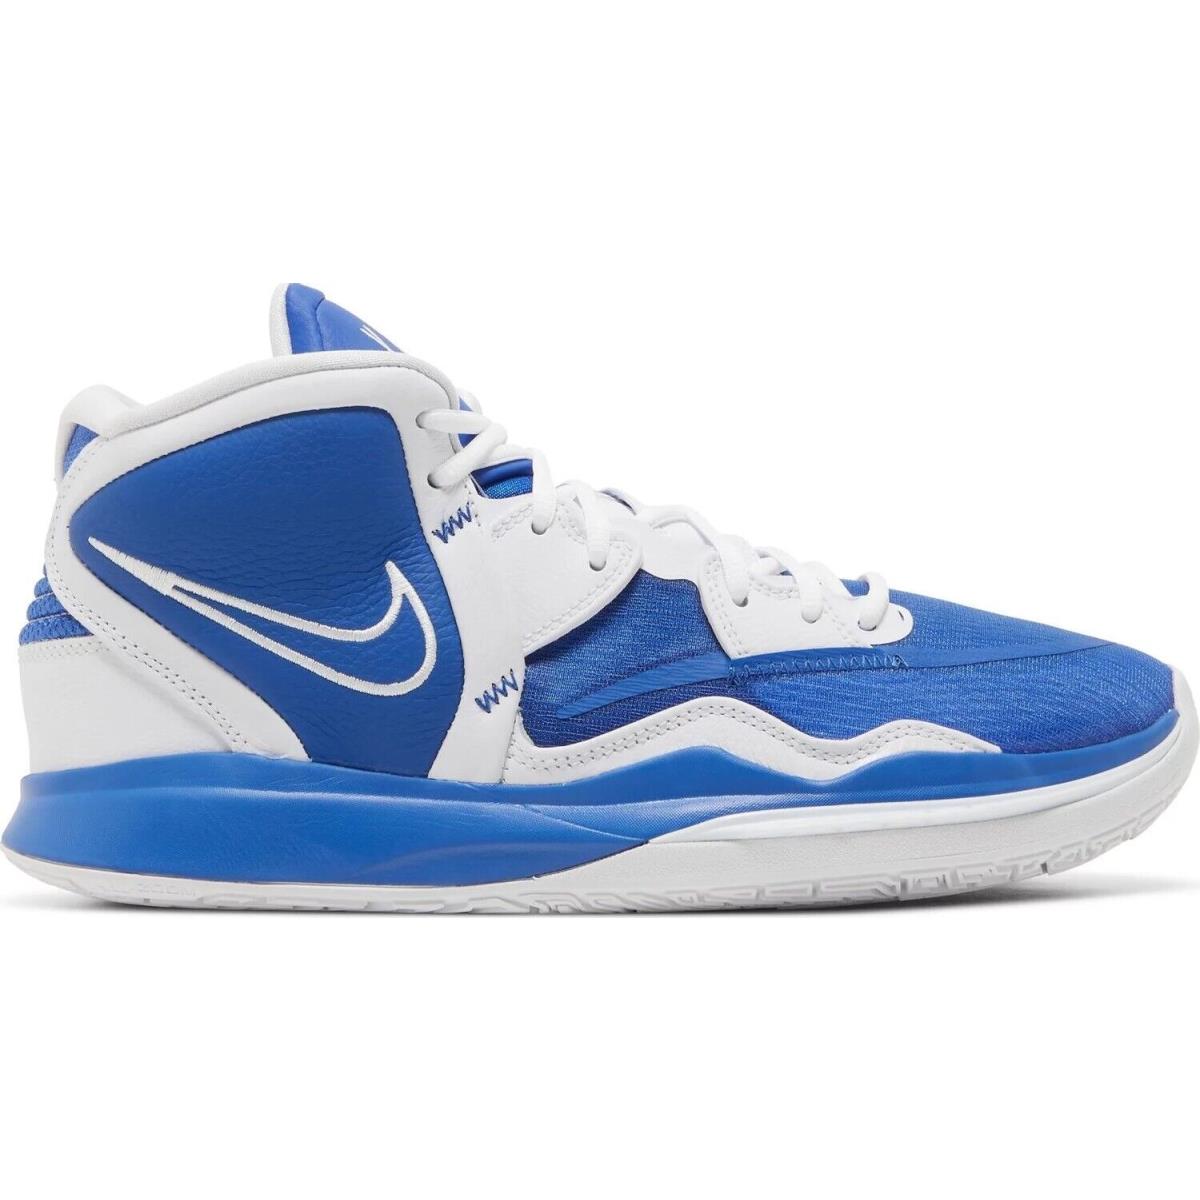 Nike Kyrie Infinity TB Game Royal White Basketball Shoes DO9616-401 Men`s 11-12 - Multicolor